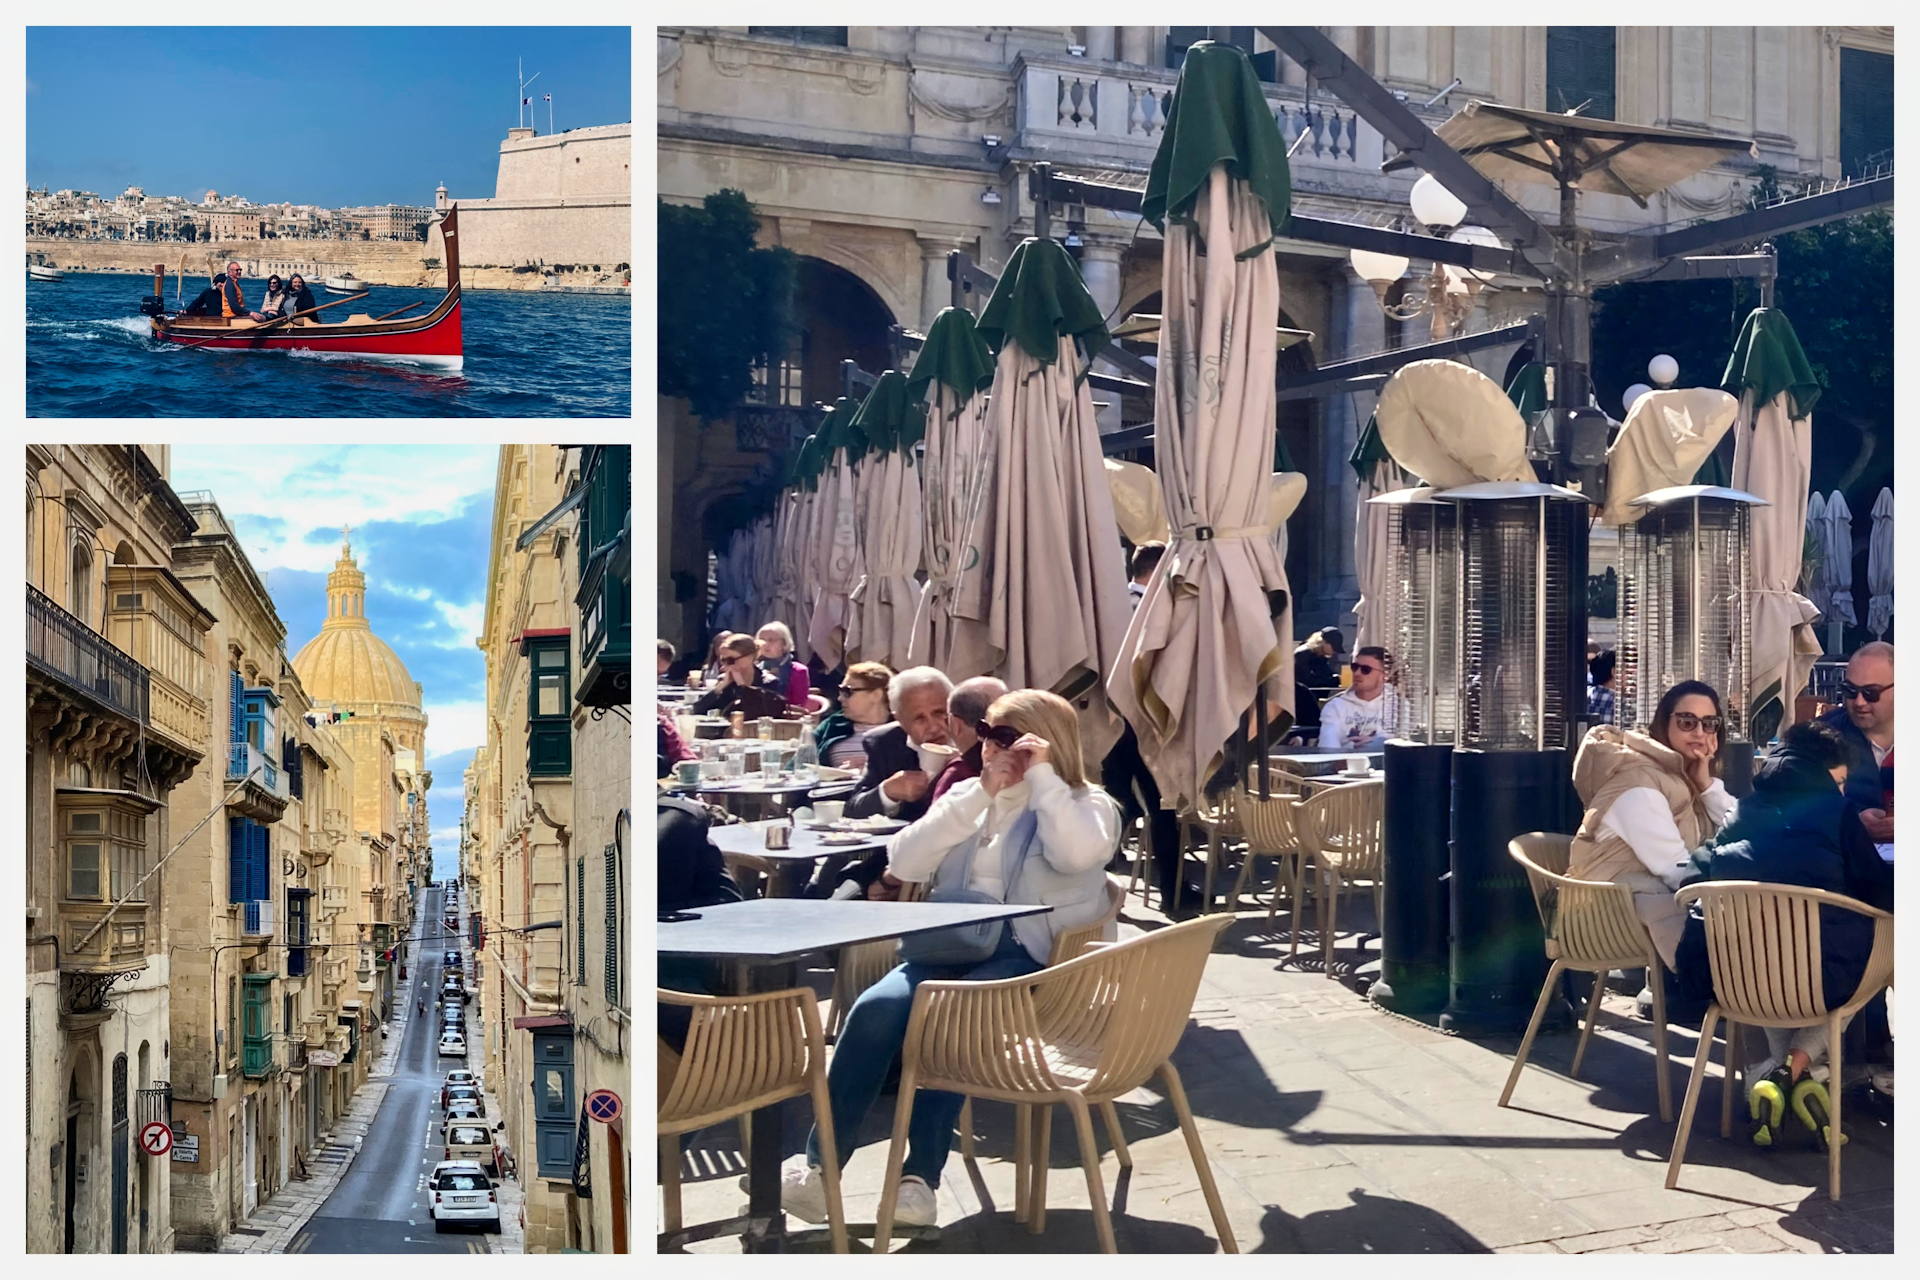 Snapshot from scenes of daily life in Malta including people dining at cafe, gondolas crusing on St Julians Bay and backstreets of Valleta